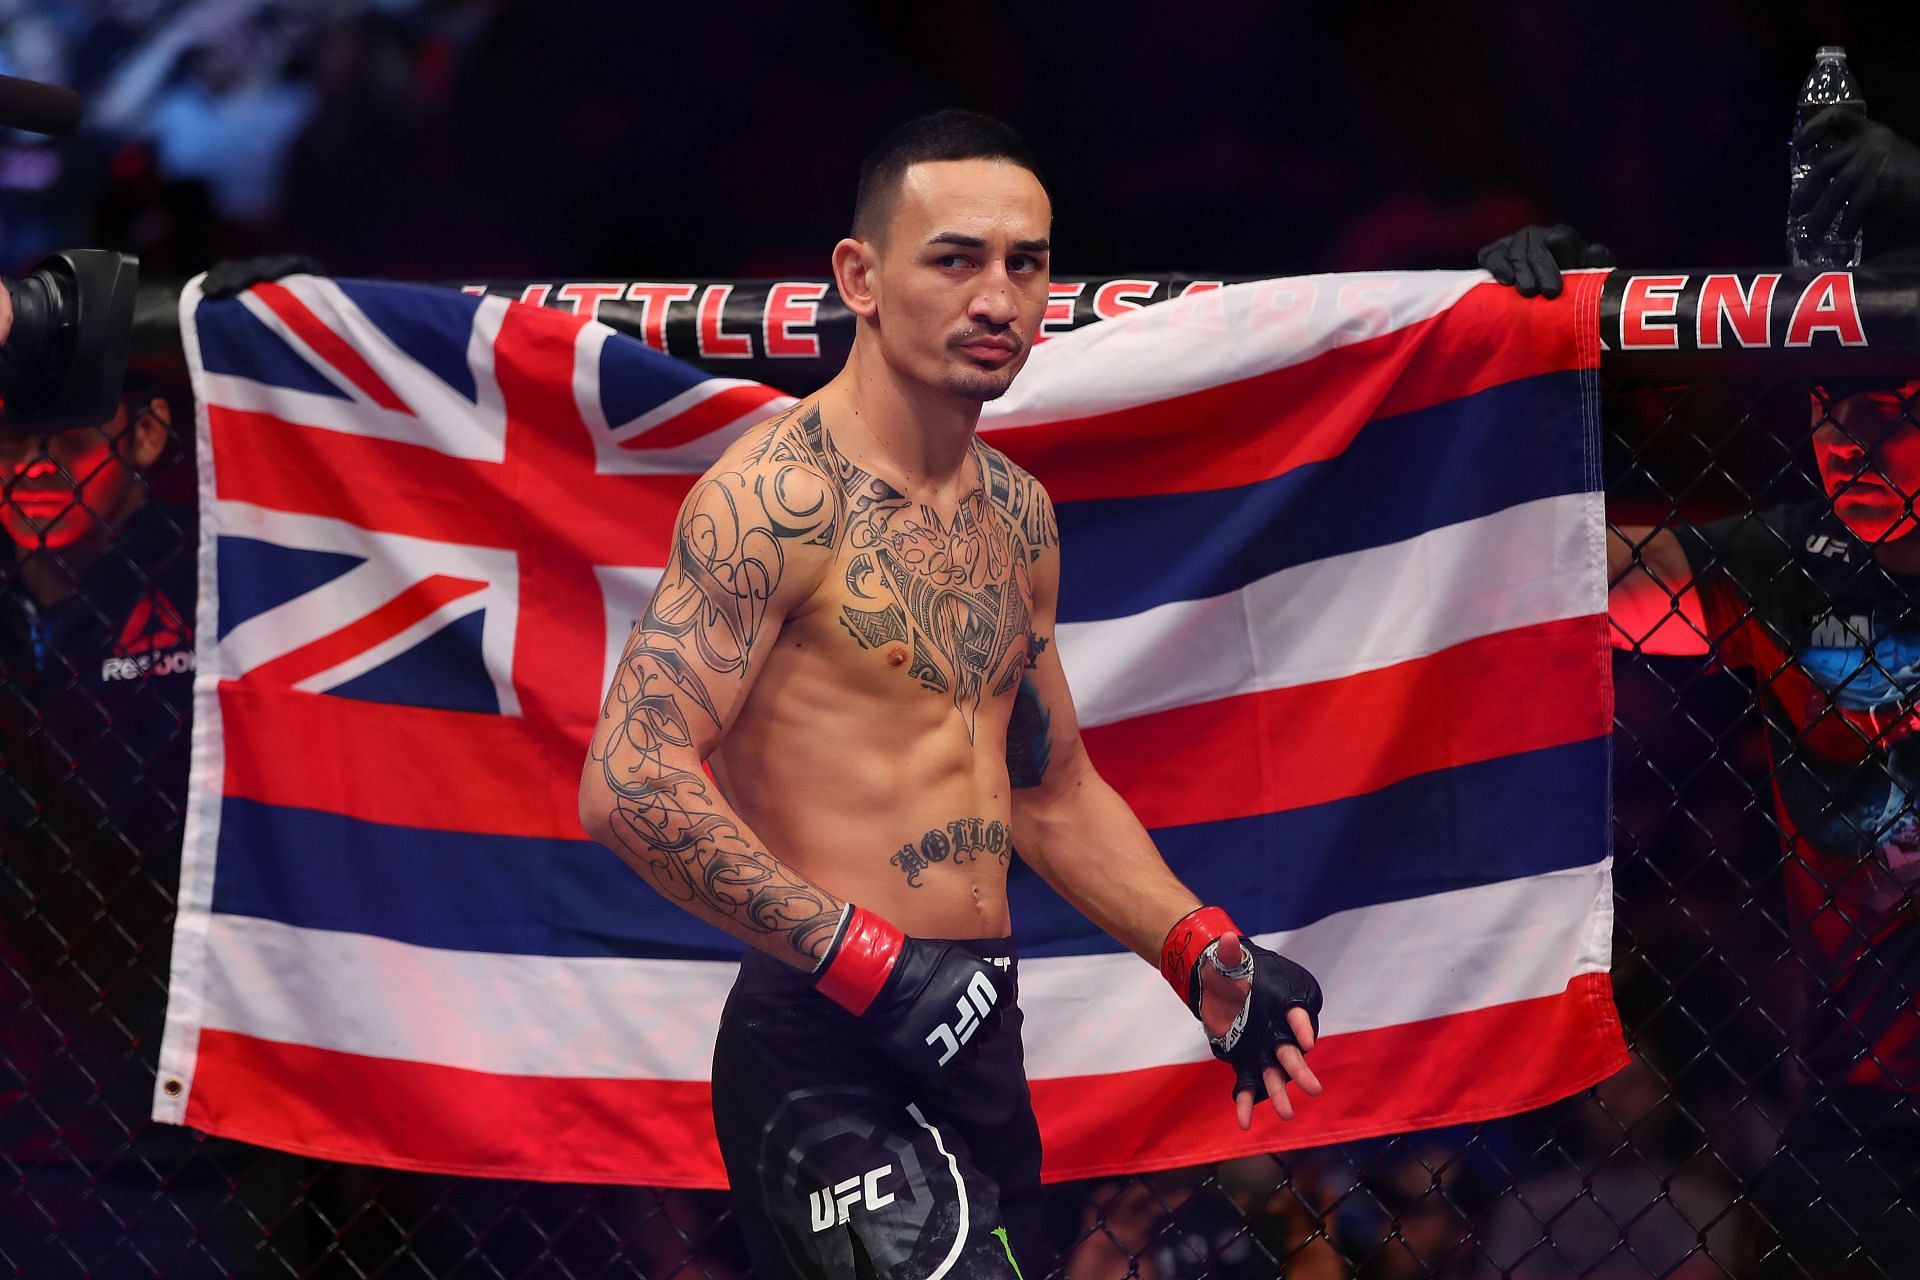 Max Holloway should potentially look to move up in weight in 2022